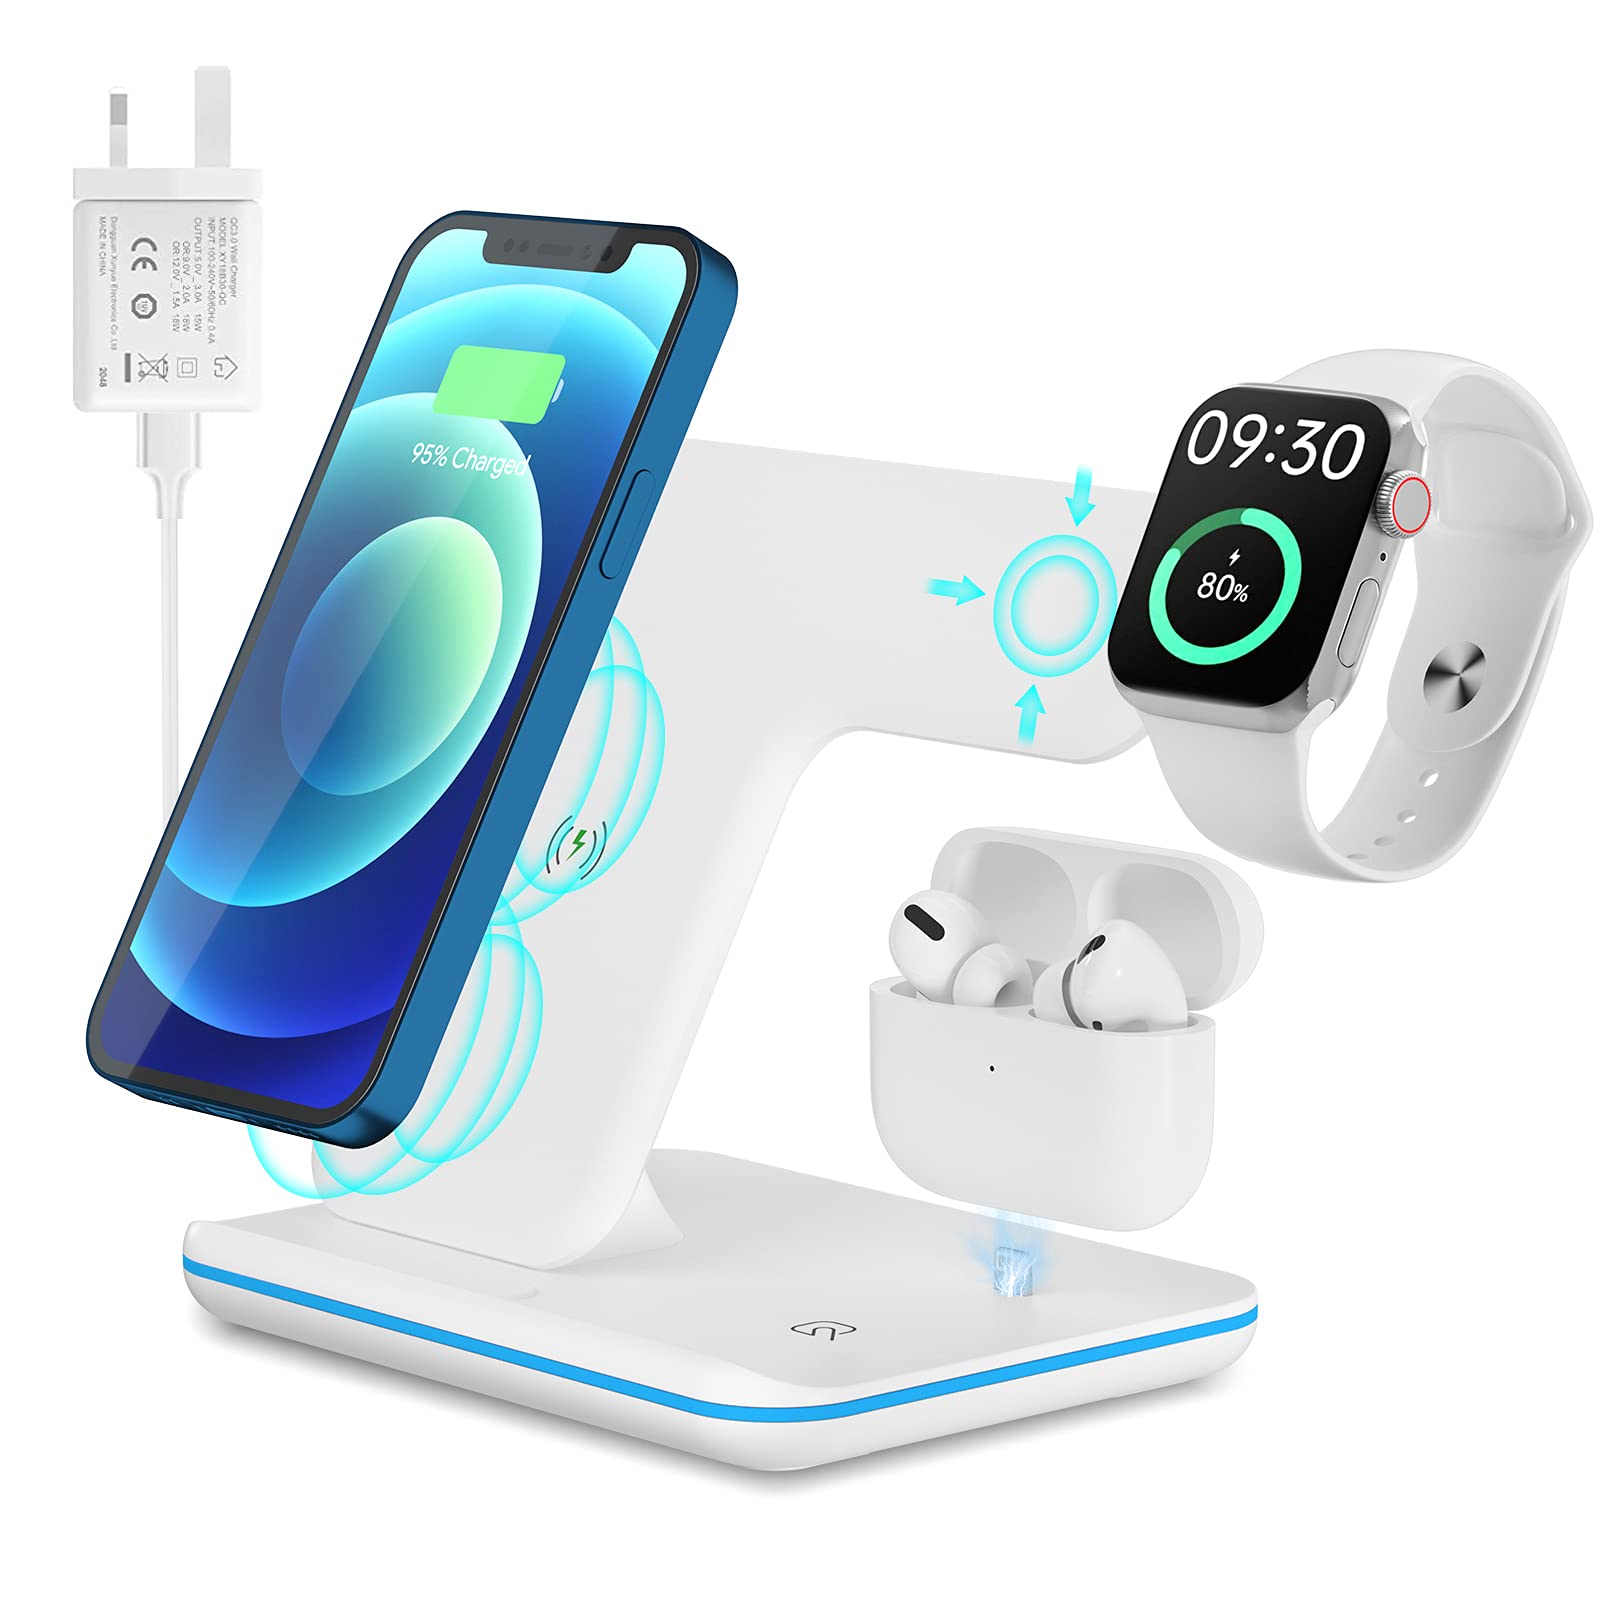 Wireless Charger, 15W Fast Charging Station 3 in 1 Charging Dock Compatible with Apple iPhone Series Apple Watch 2/3/4/5 Series AirPods, Fast Charger for Samsung Huawei Qi Compatible Phones(White)